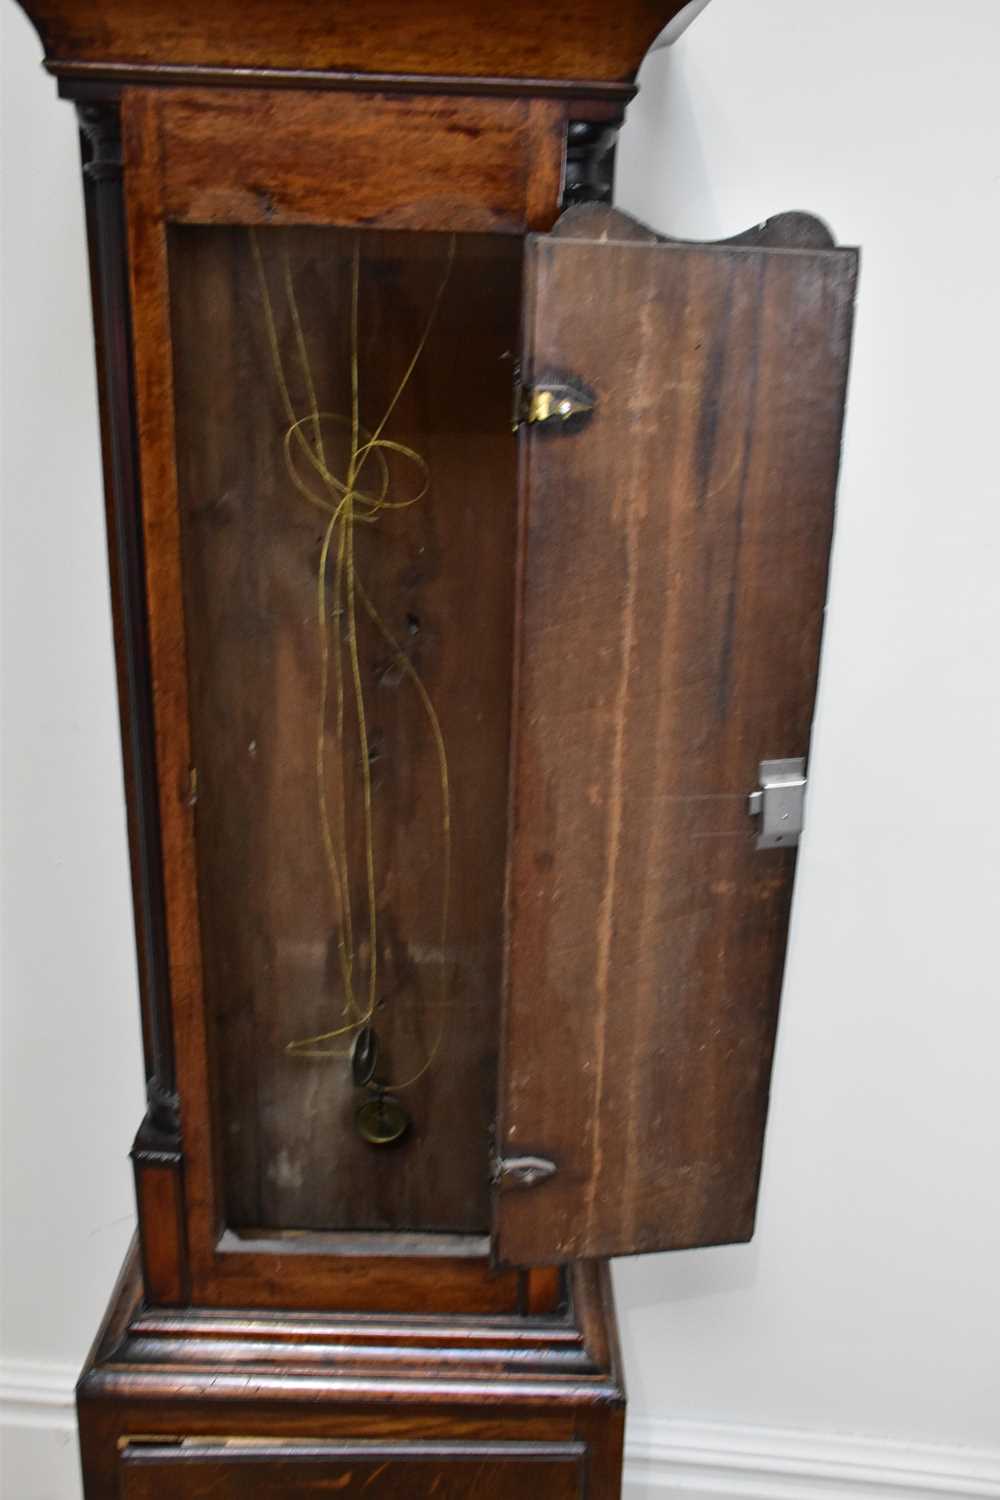 SAMUEL WRIGHT, NORTHWICH, an 18th century eight day longcase clock, the brass face with applied - Image 6 of 6